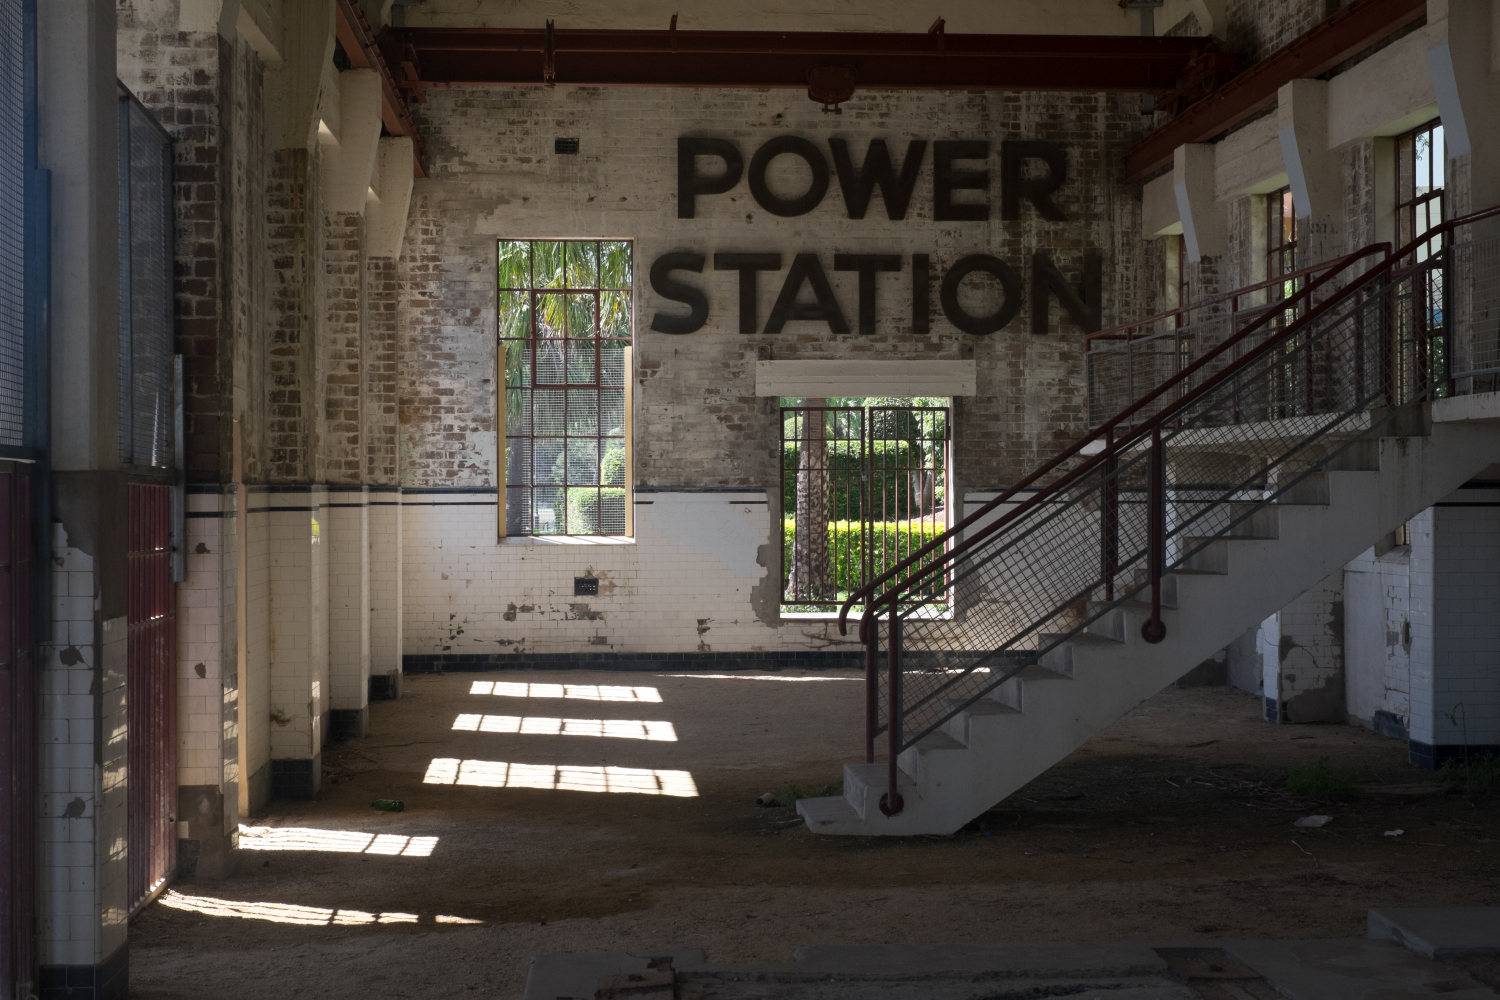 Darkened run down space with white and white washed brick walls staircase leading to right of the image and the words Power Station set onto the wall